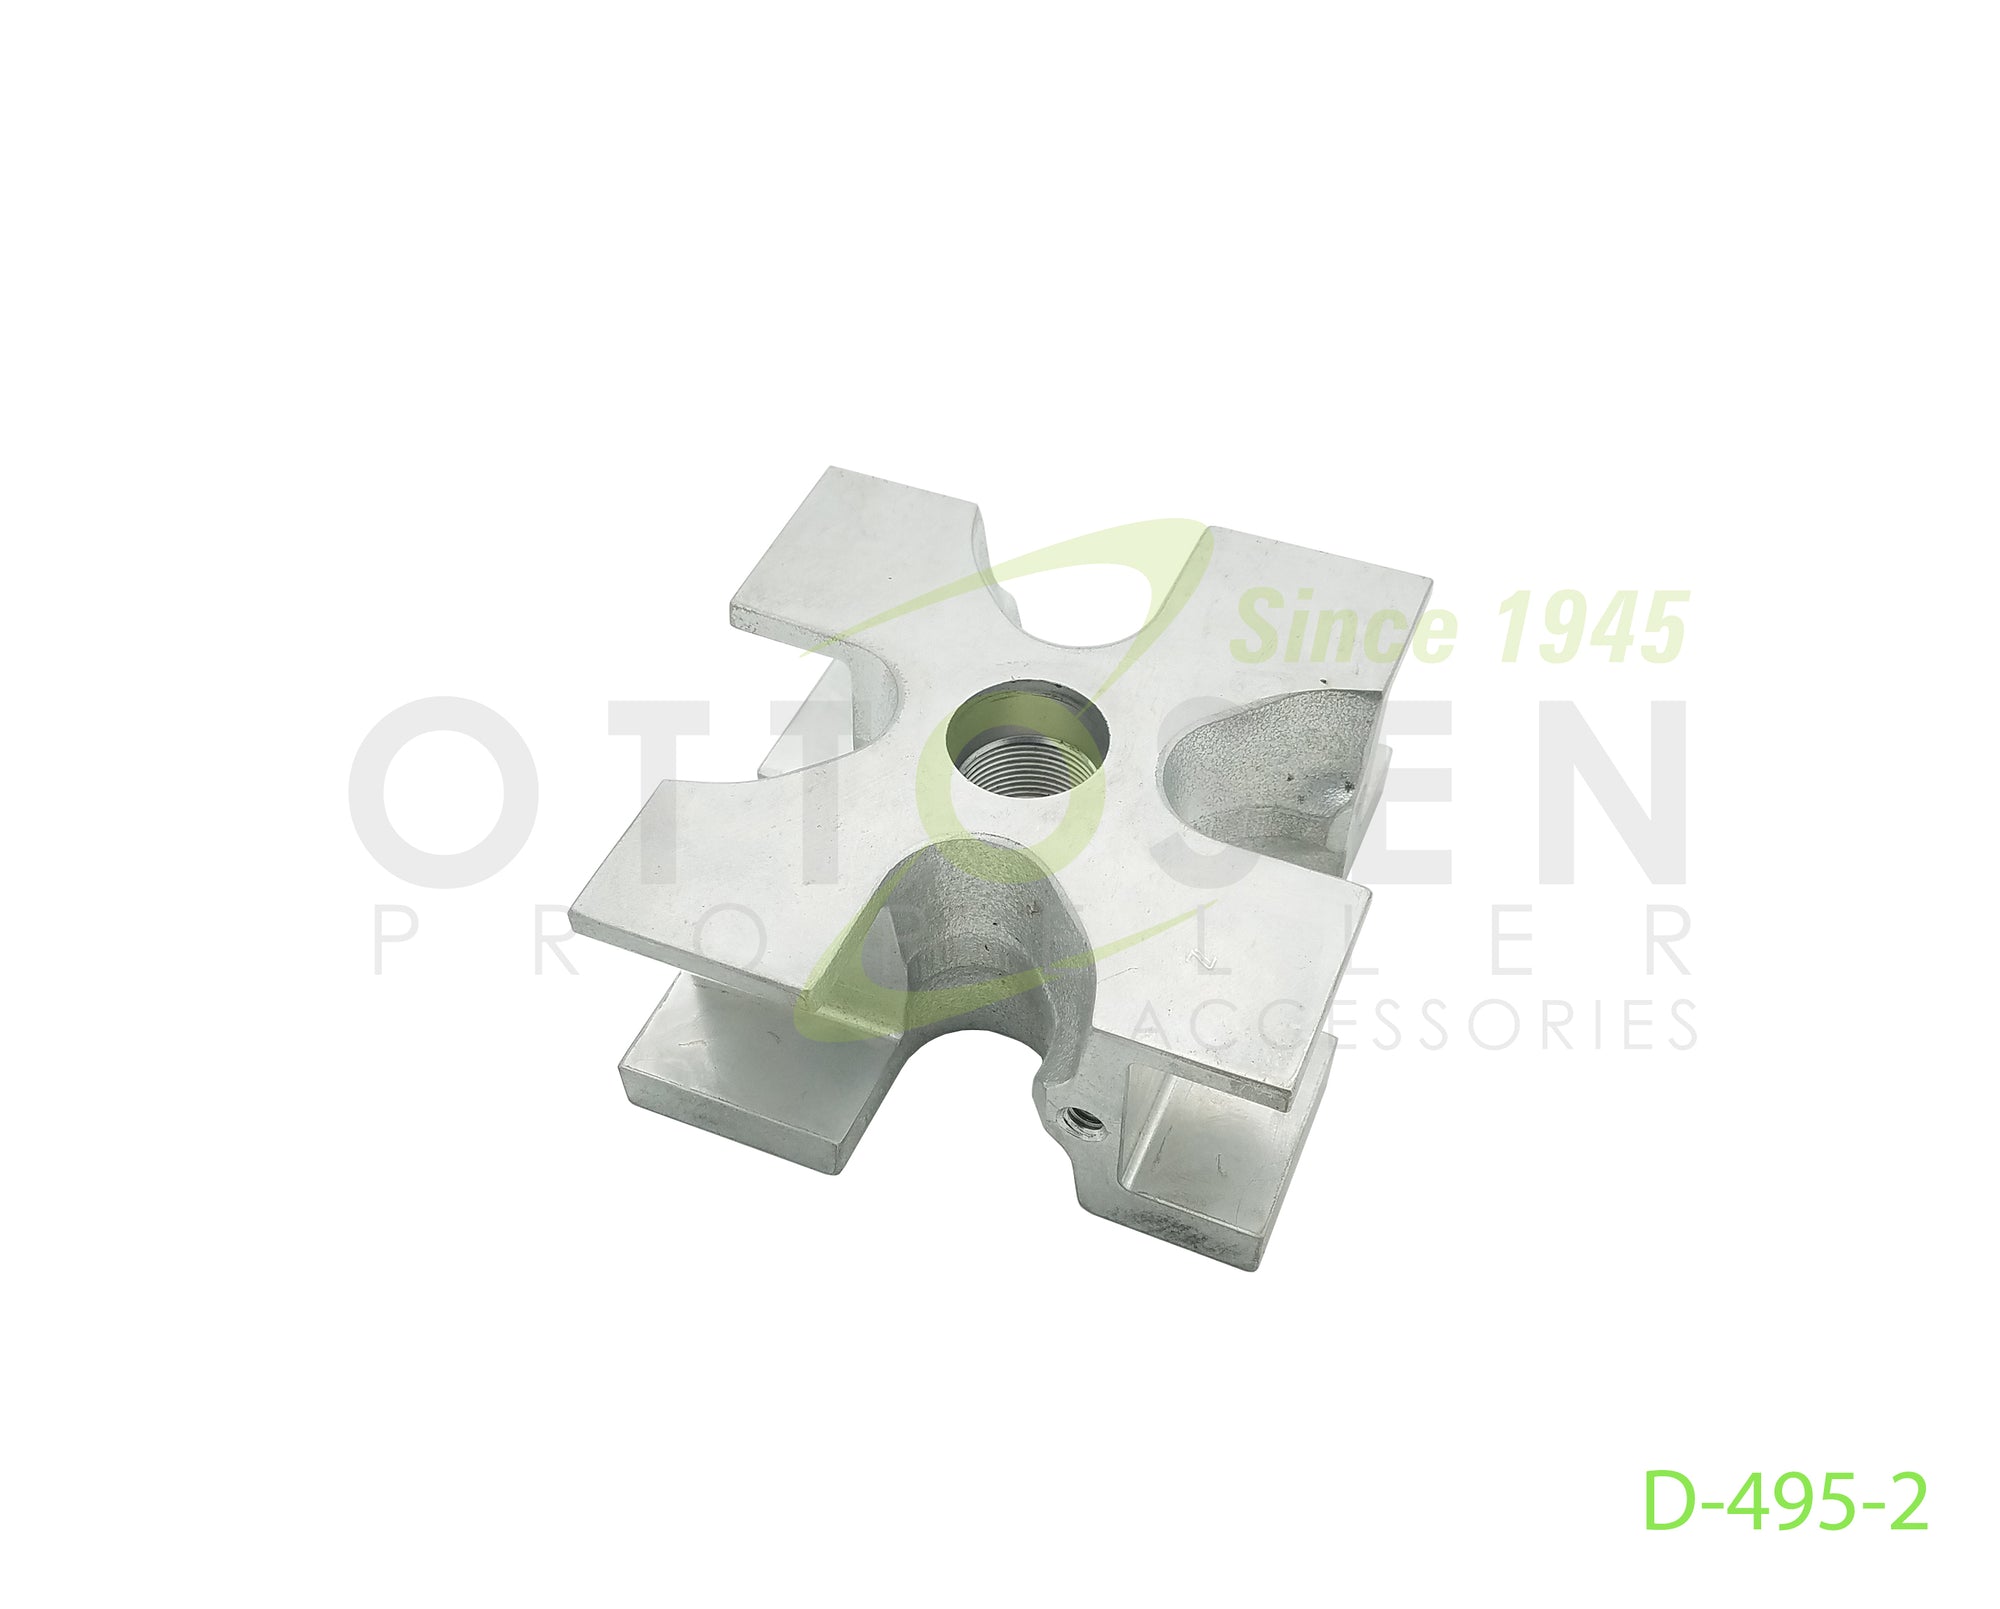 D-495-2-HARTZELL-PROPELLER-FOUR-WAY-FORK-RIGHT-HAND-PICTURE-1